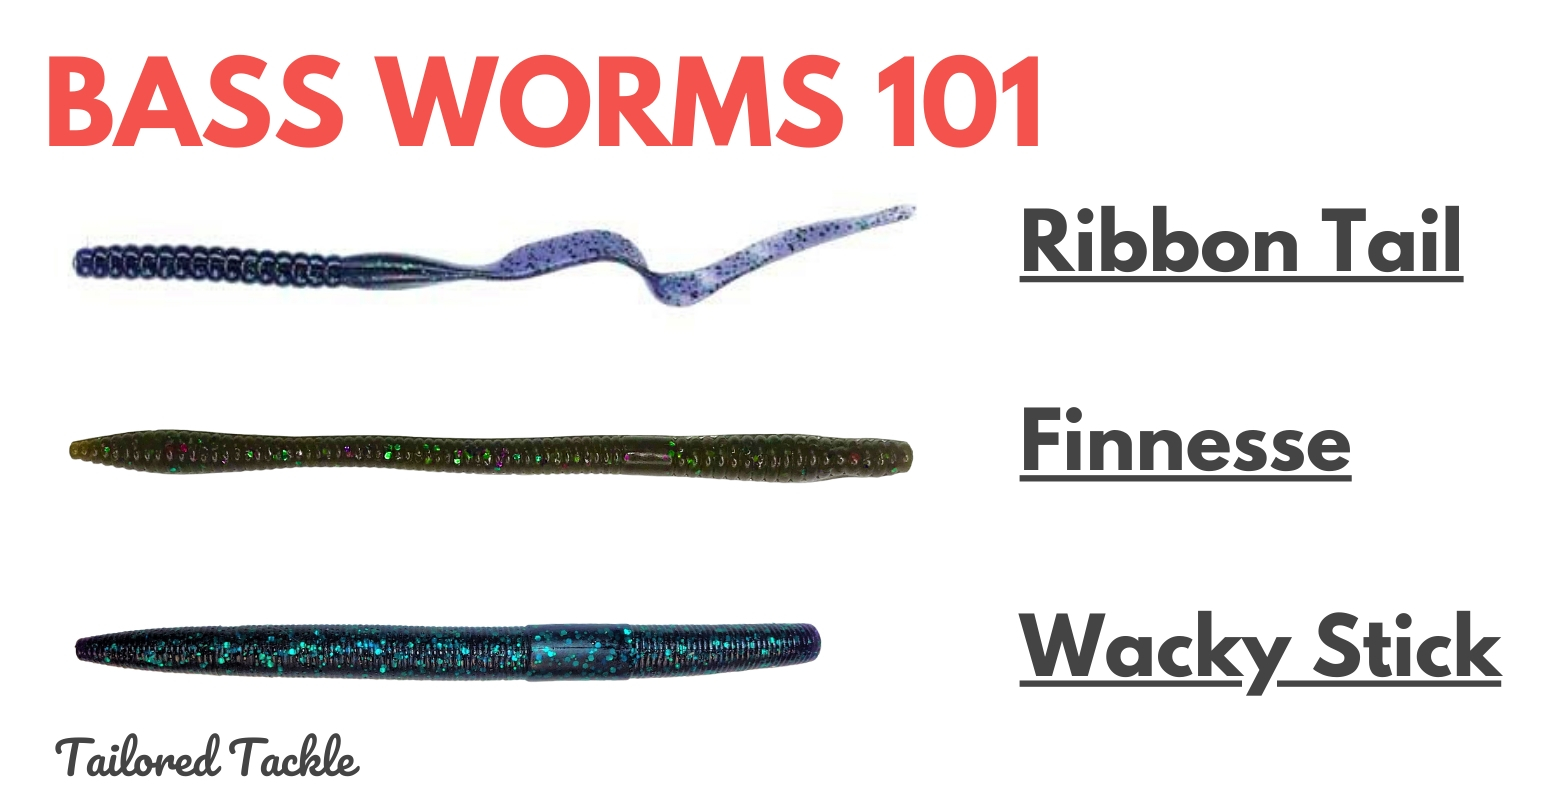 Bass Worms 101 Plastic Worms For Bass Fishing Tailored Tackle